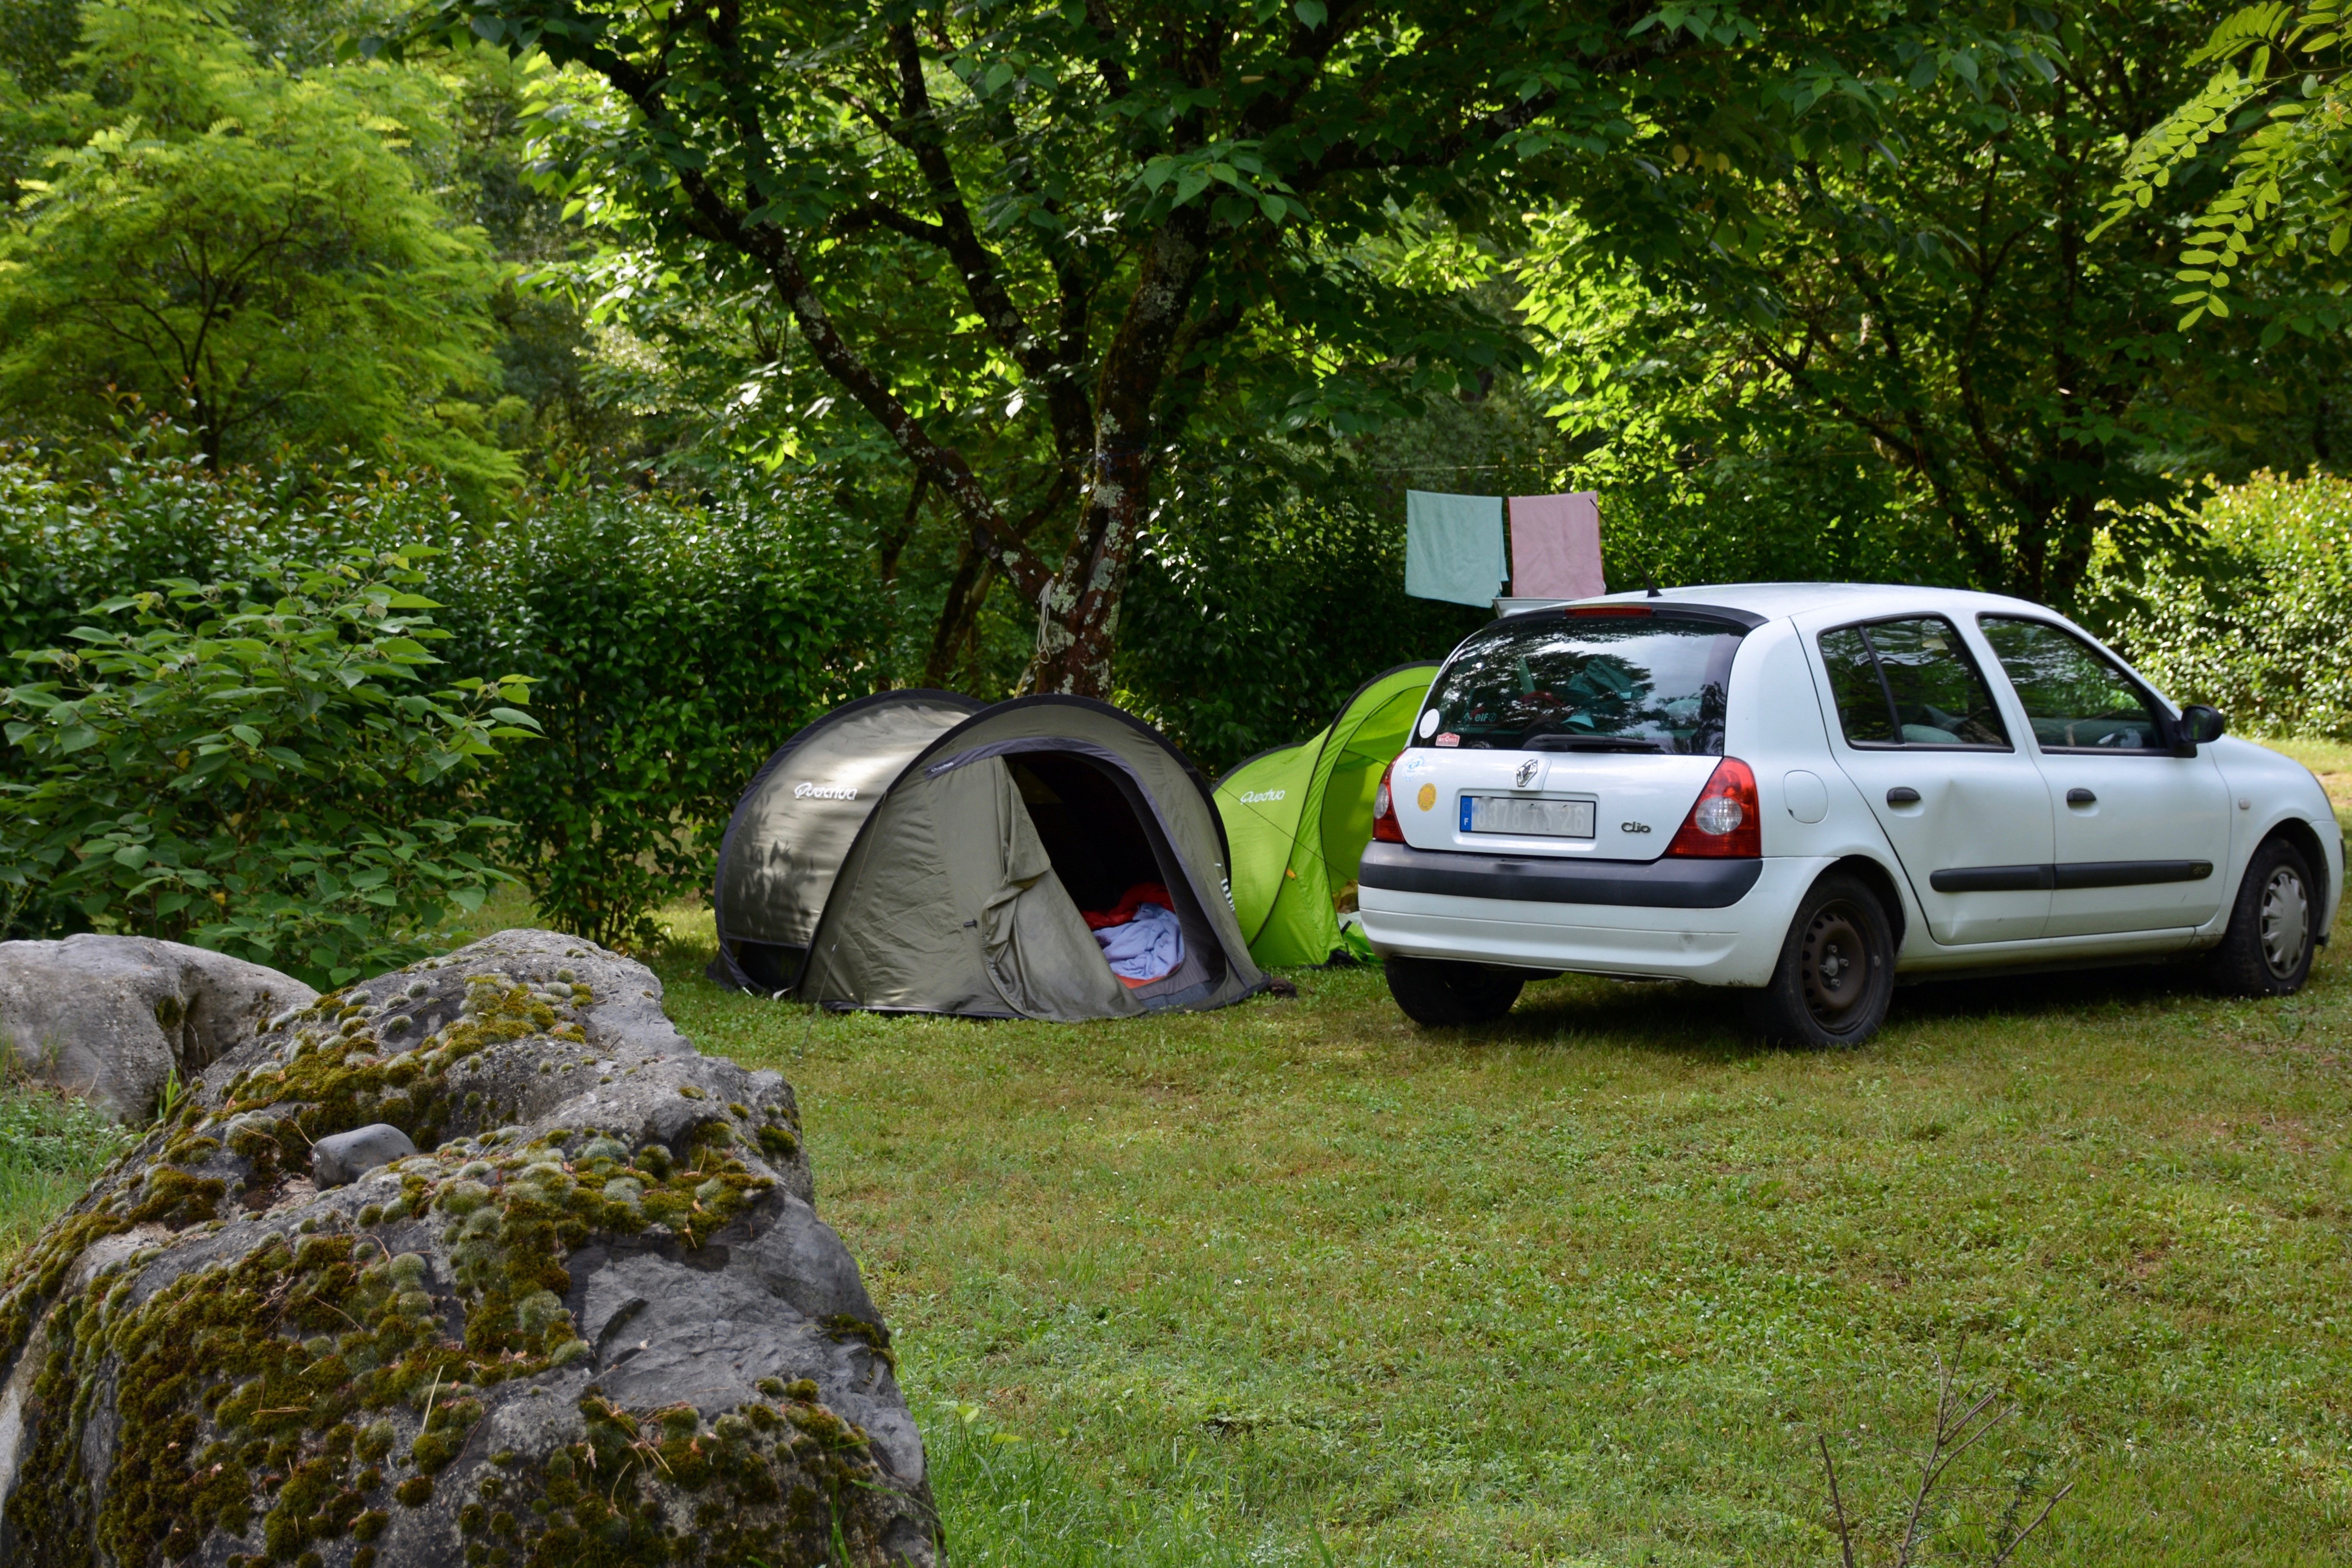 Pitch - Pitch 80M² À 200M²  : Car + Tent/Caravan Or Camping-Car - Camping Le Coin Charmant